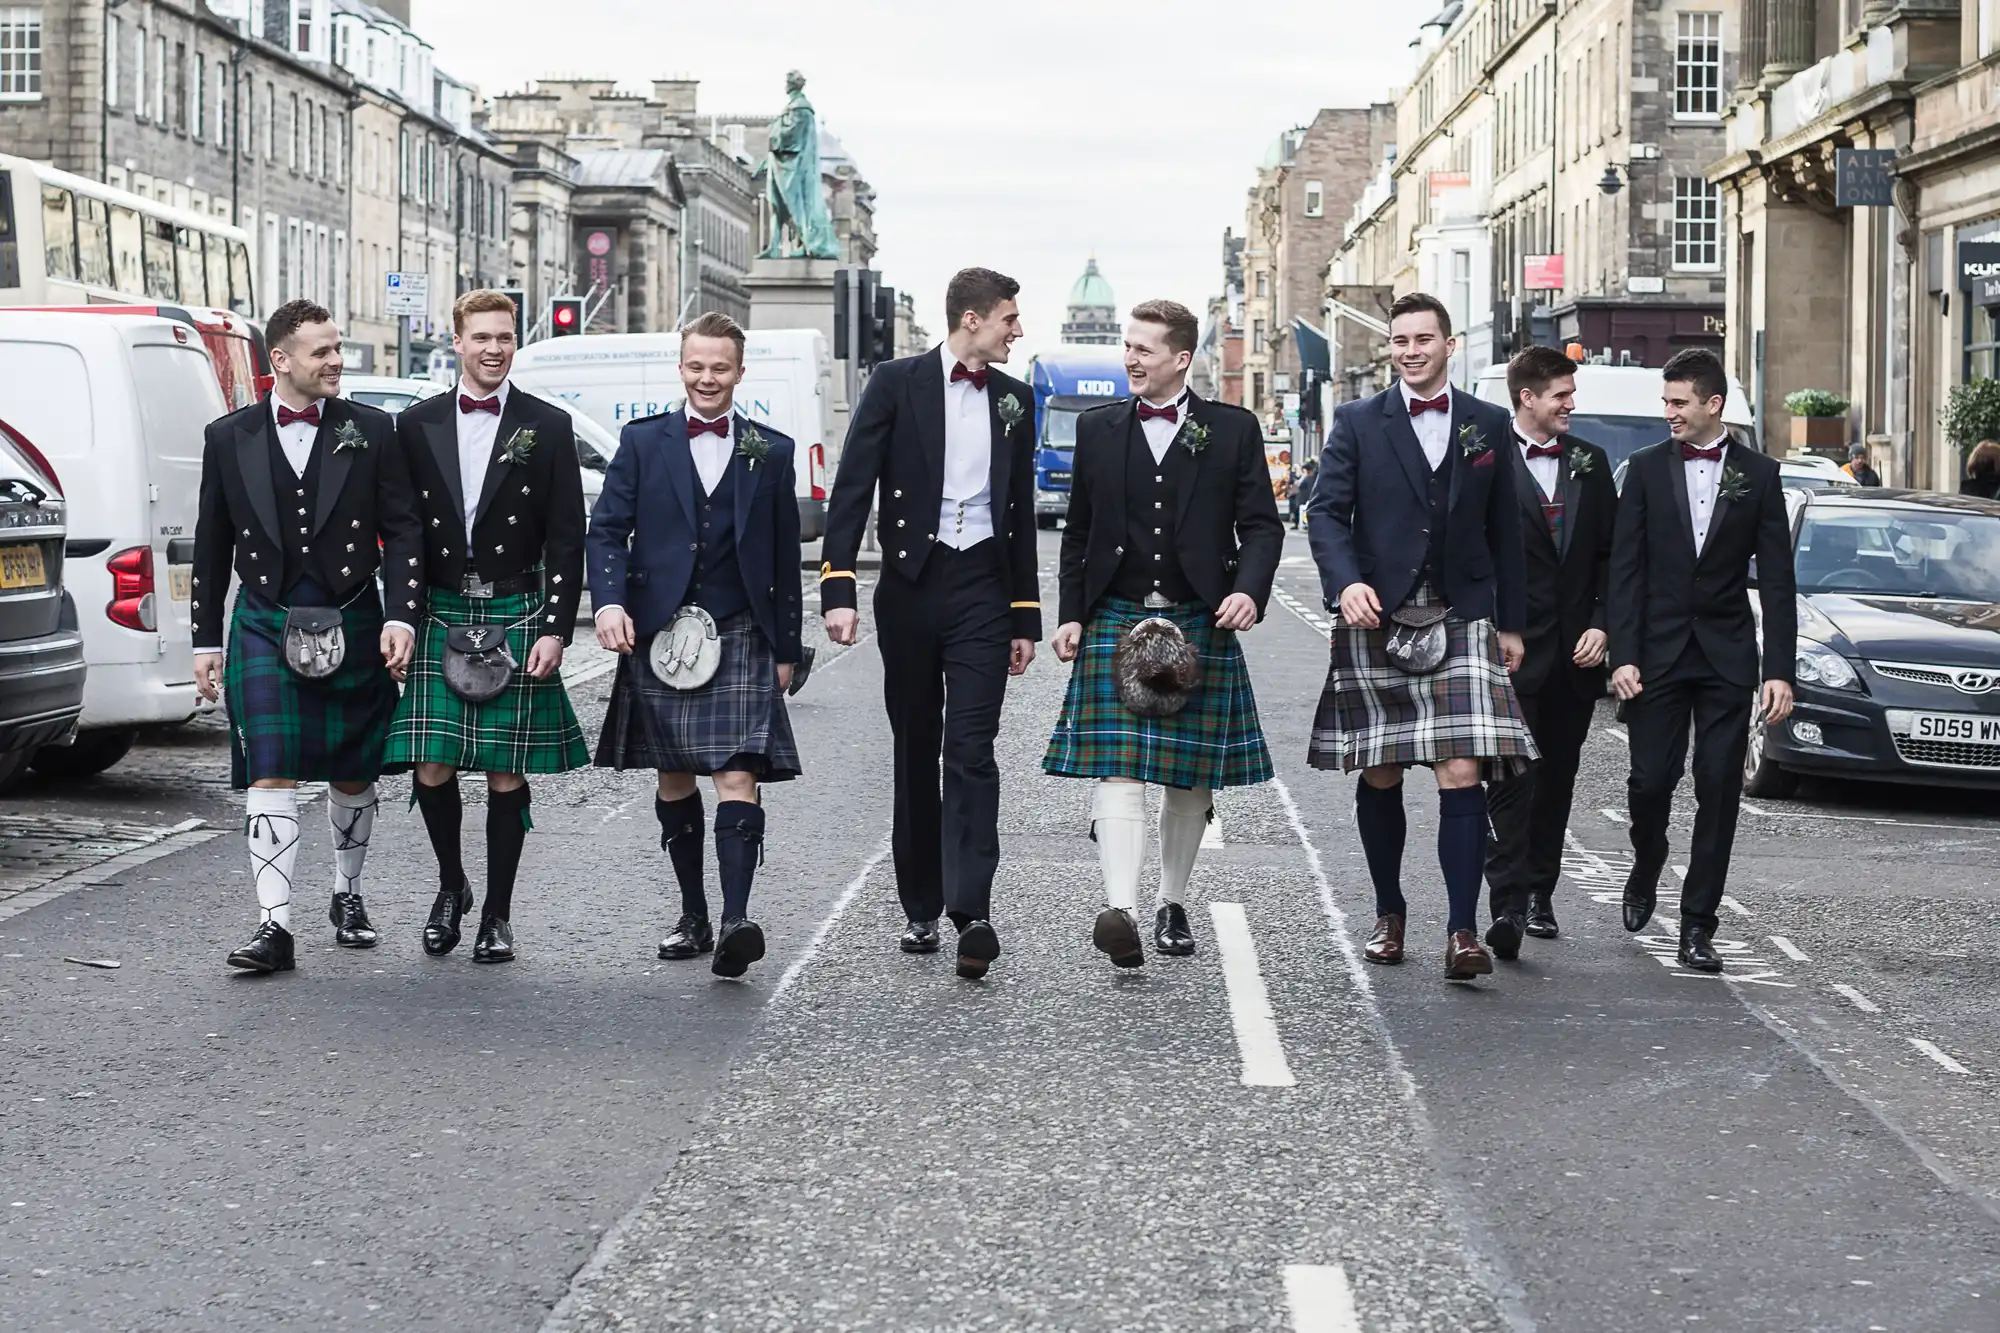 A group of men, some in kilts and some in suits, walk down a city street.